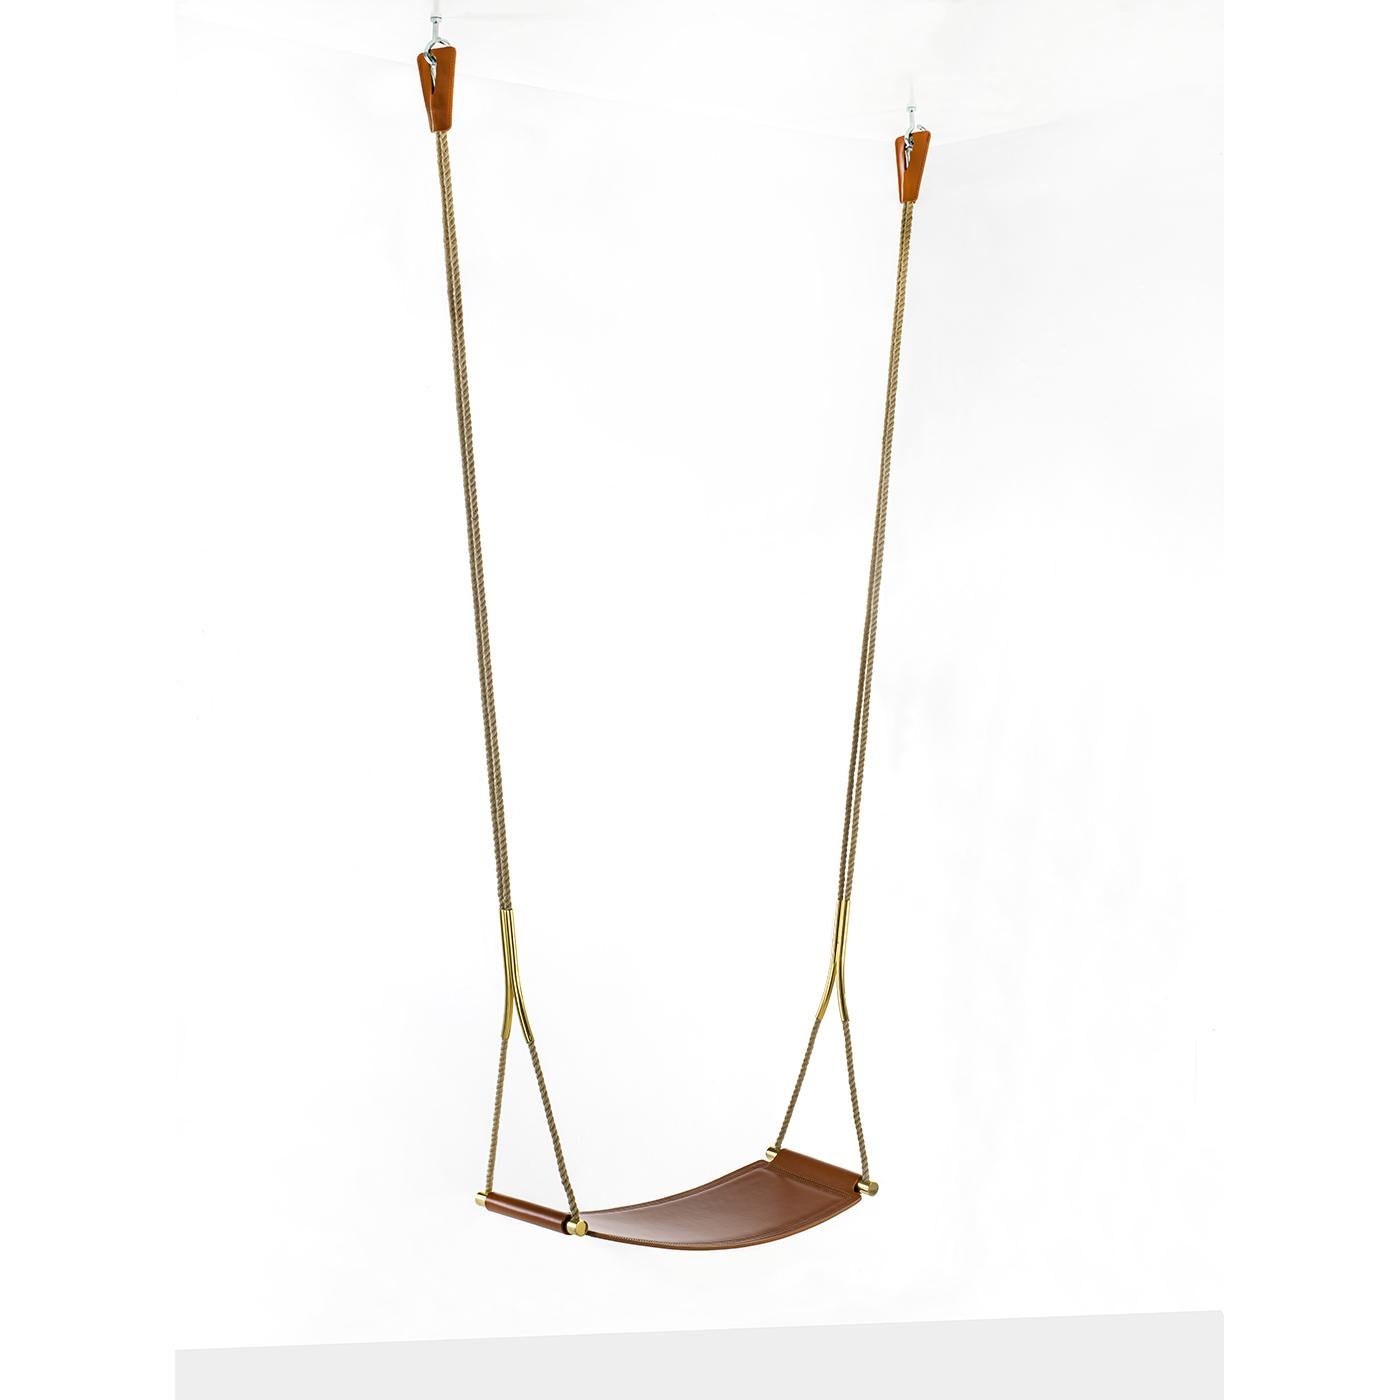 This indoor swing will add a sophisticated and playful accent to a modern loft with its brown leather seat embellished by tone-on-tone stitching. Suspended from an adjustable rope, this swing features polished bronzed brass hardware that adds a